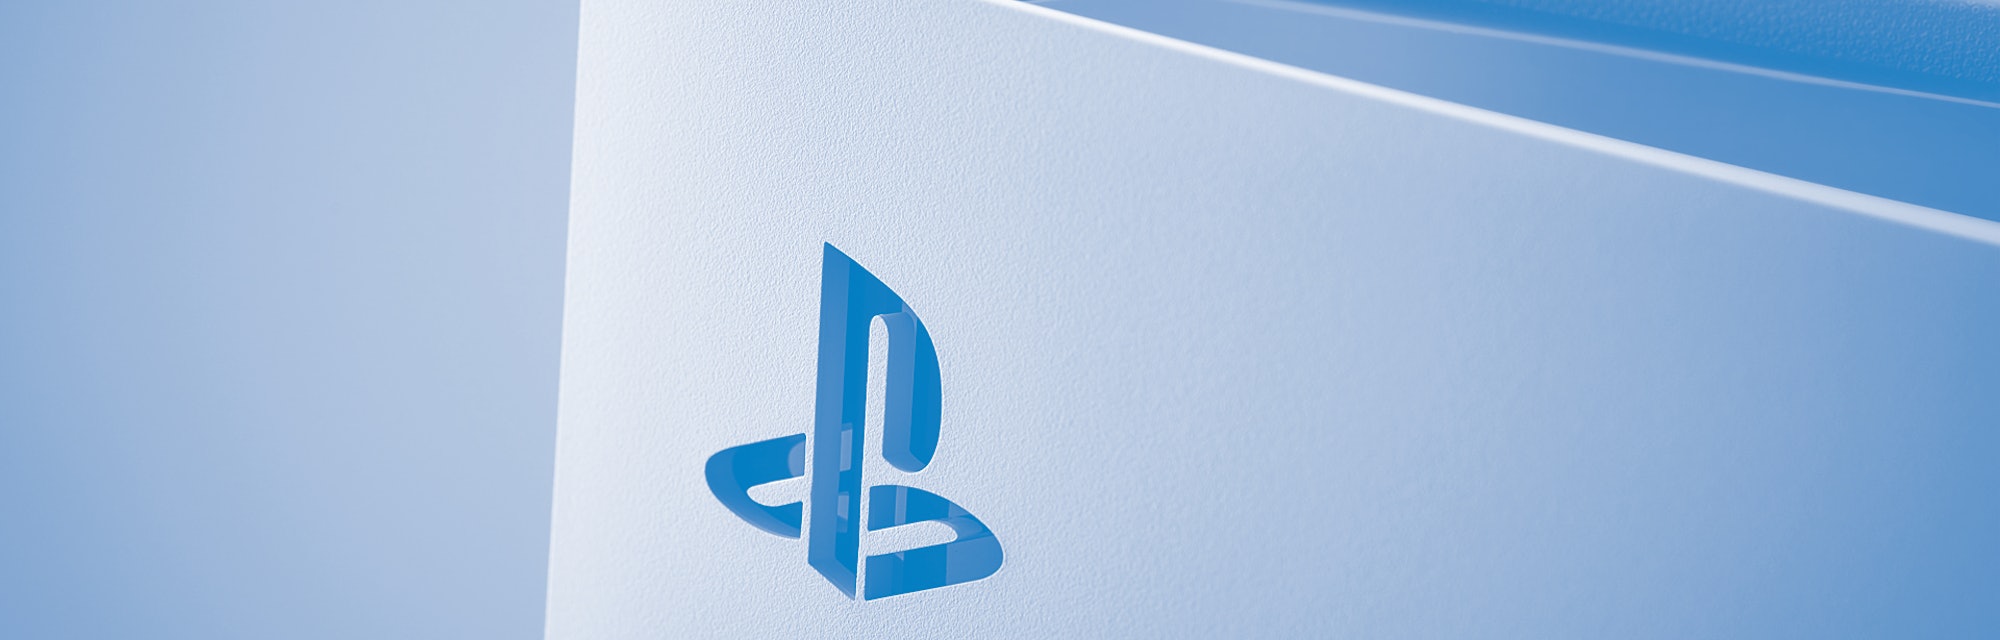 Detail of the logo on a Sony PlayStation 5 home video game console, taken on October 29, 2020. (Phot...